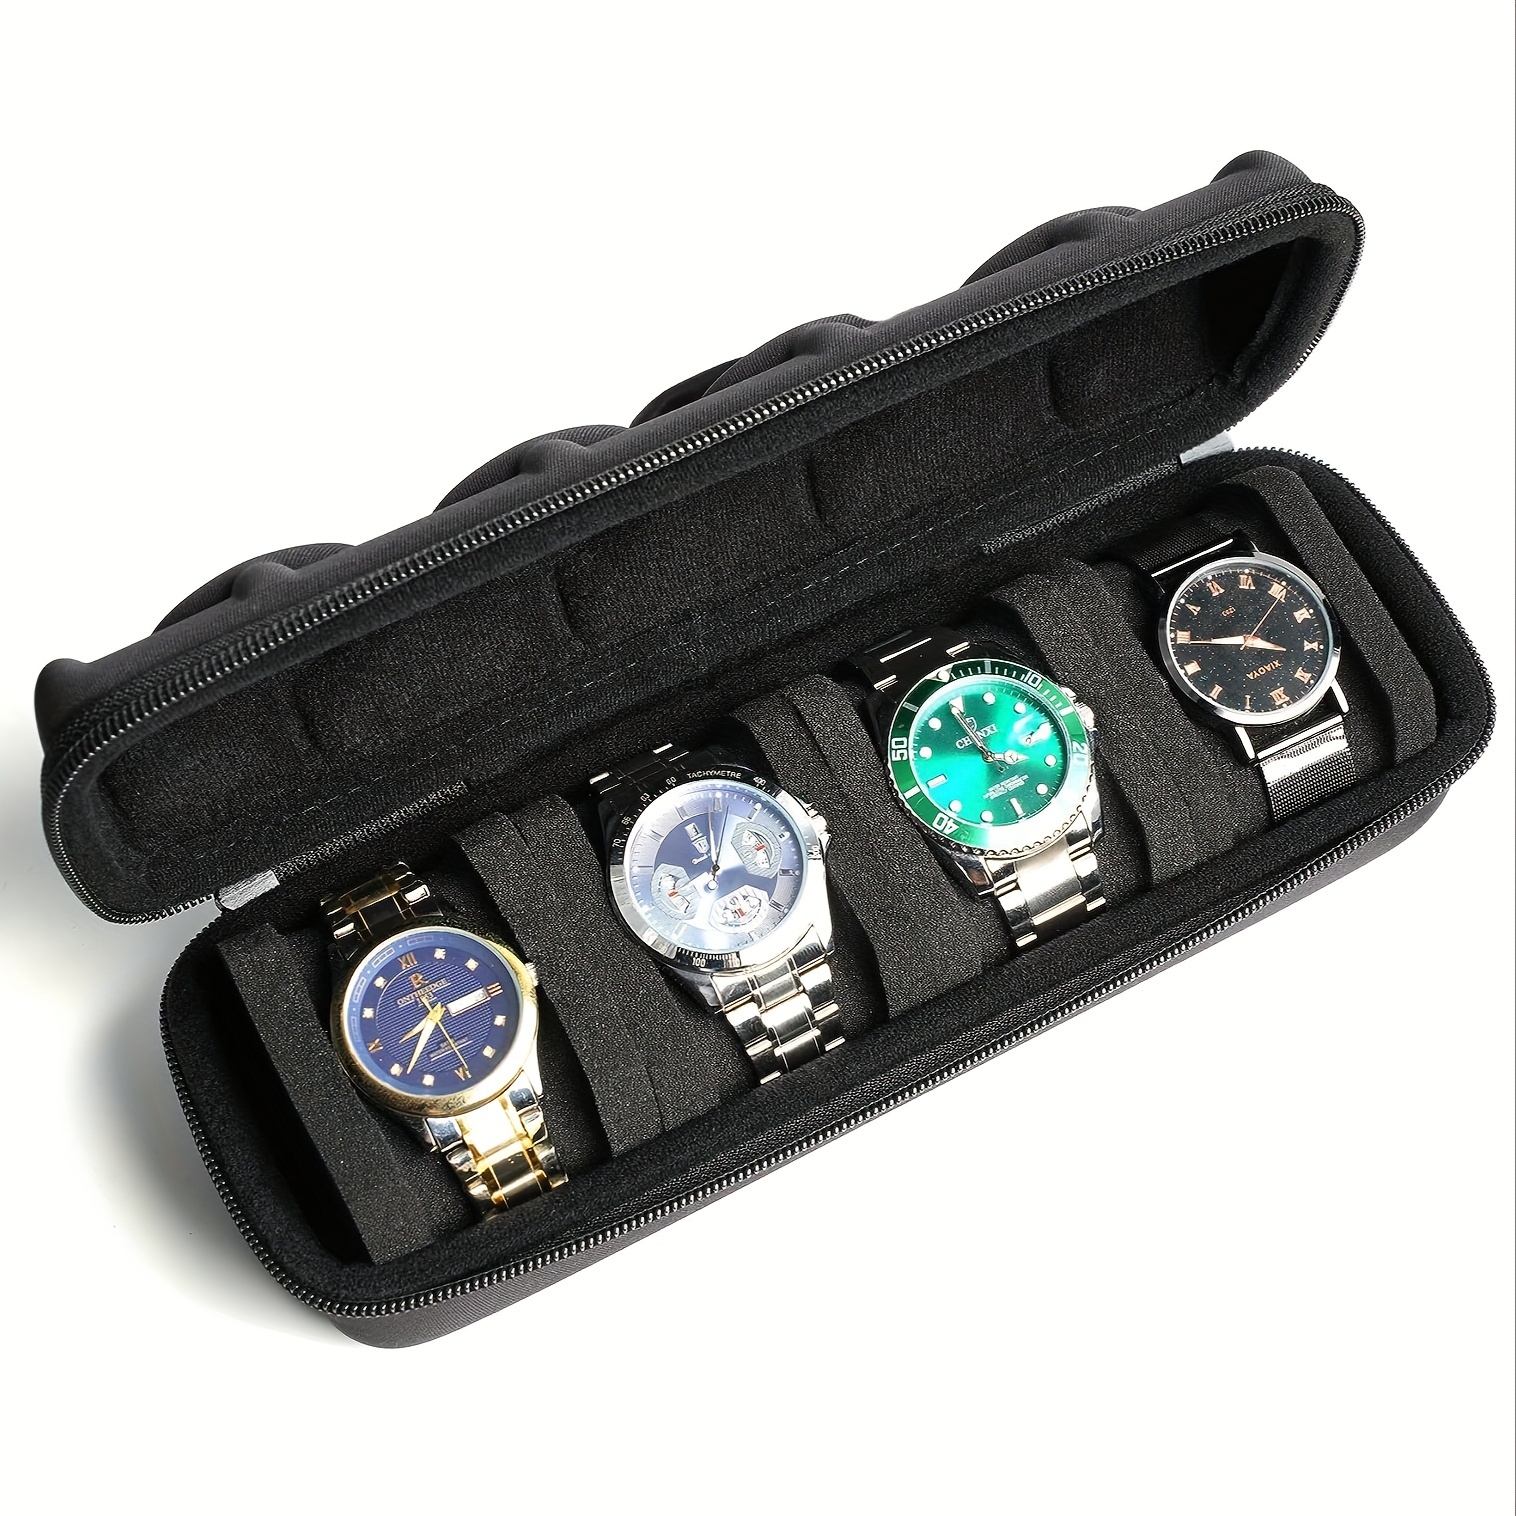 5 Slots Hard Watch Travel Case Storage With Anti-move Watch Pillow